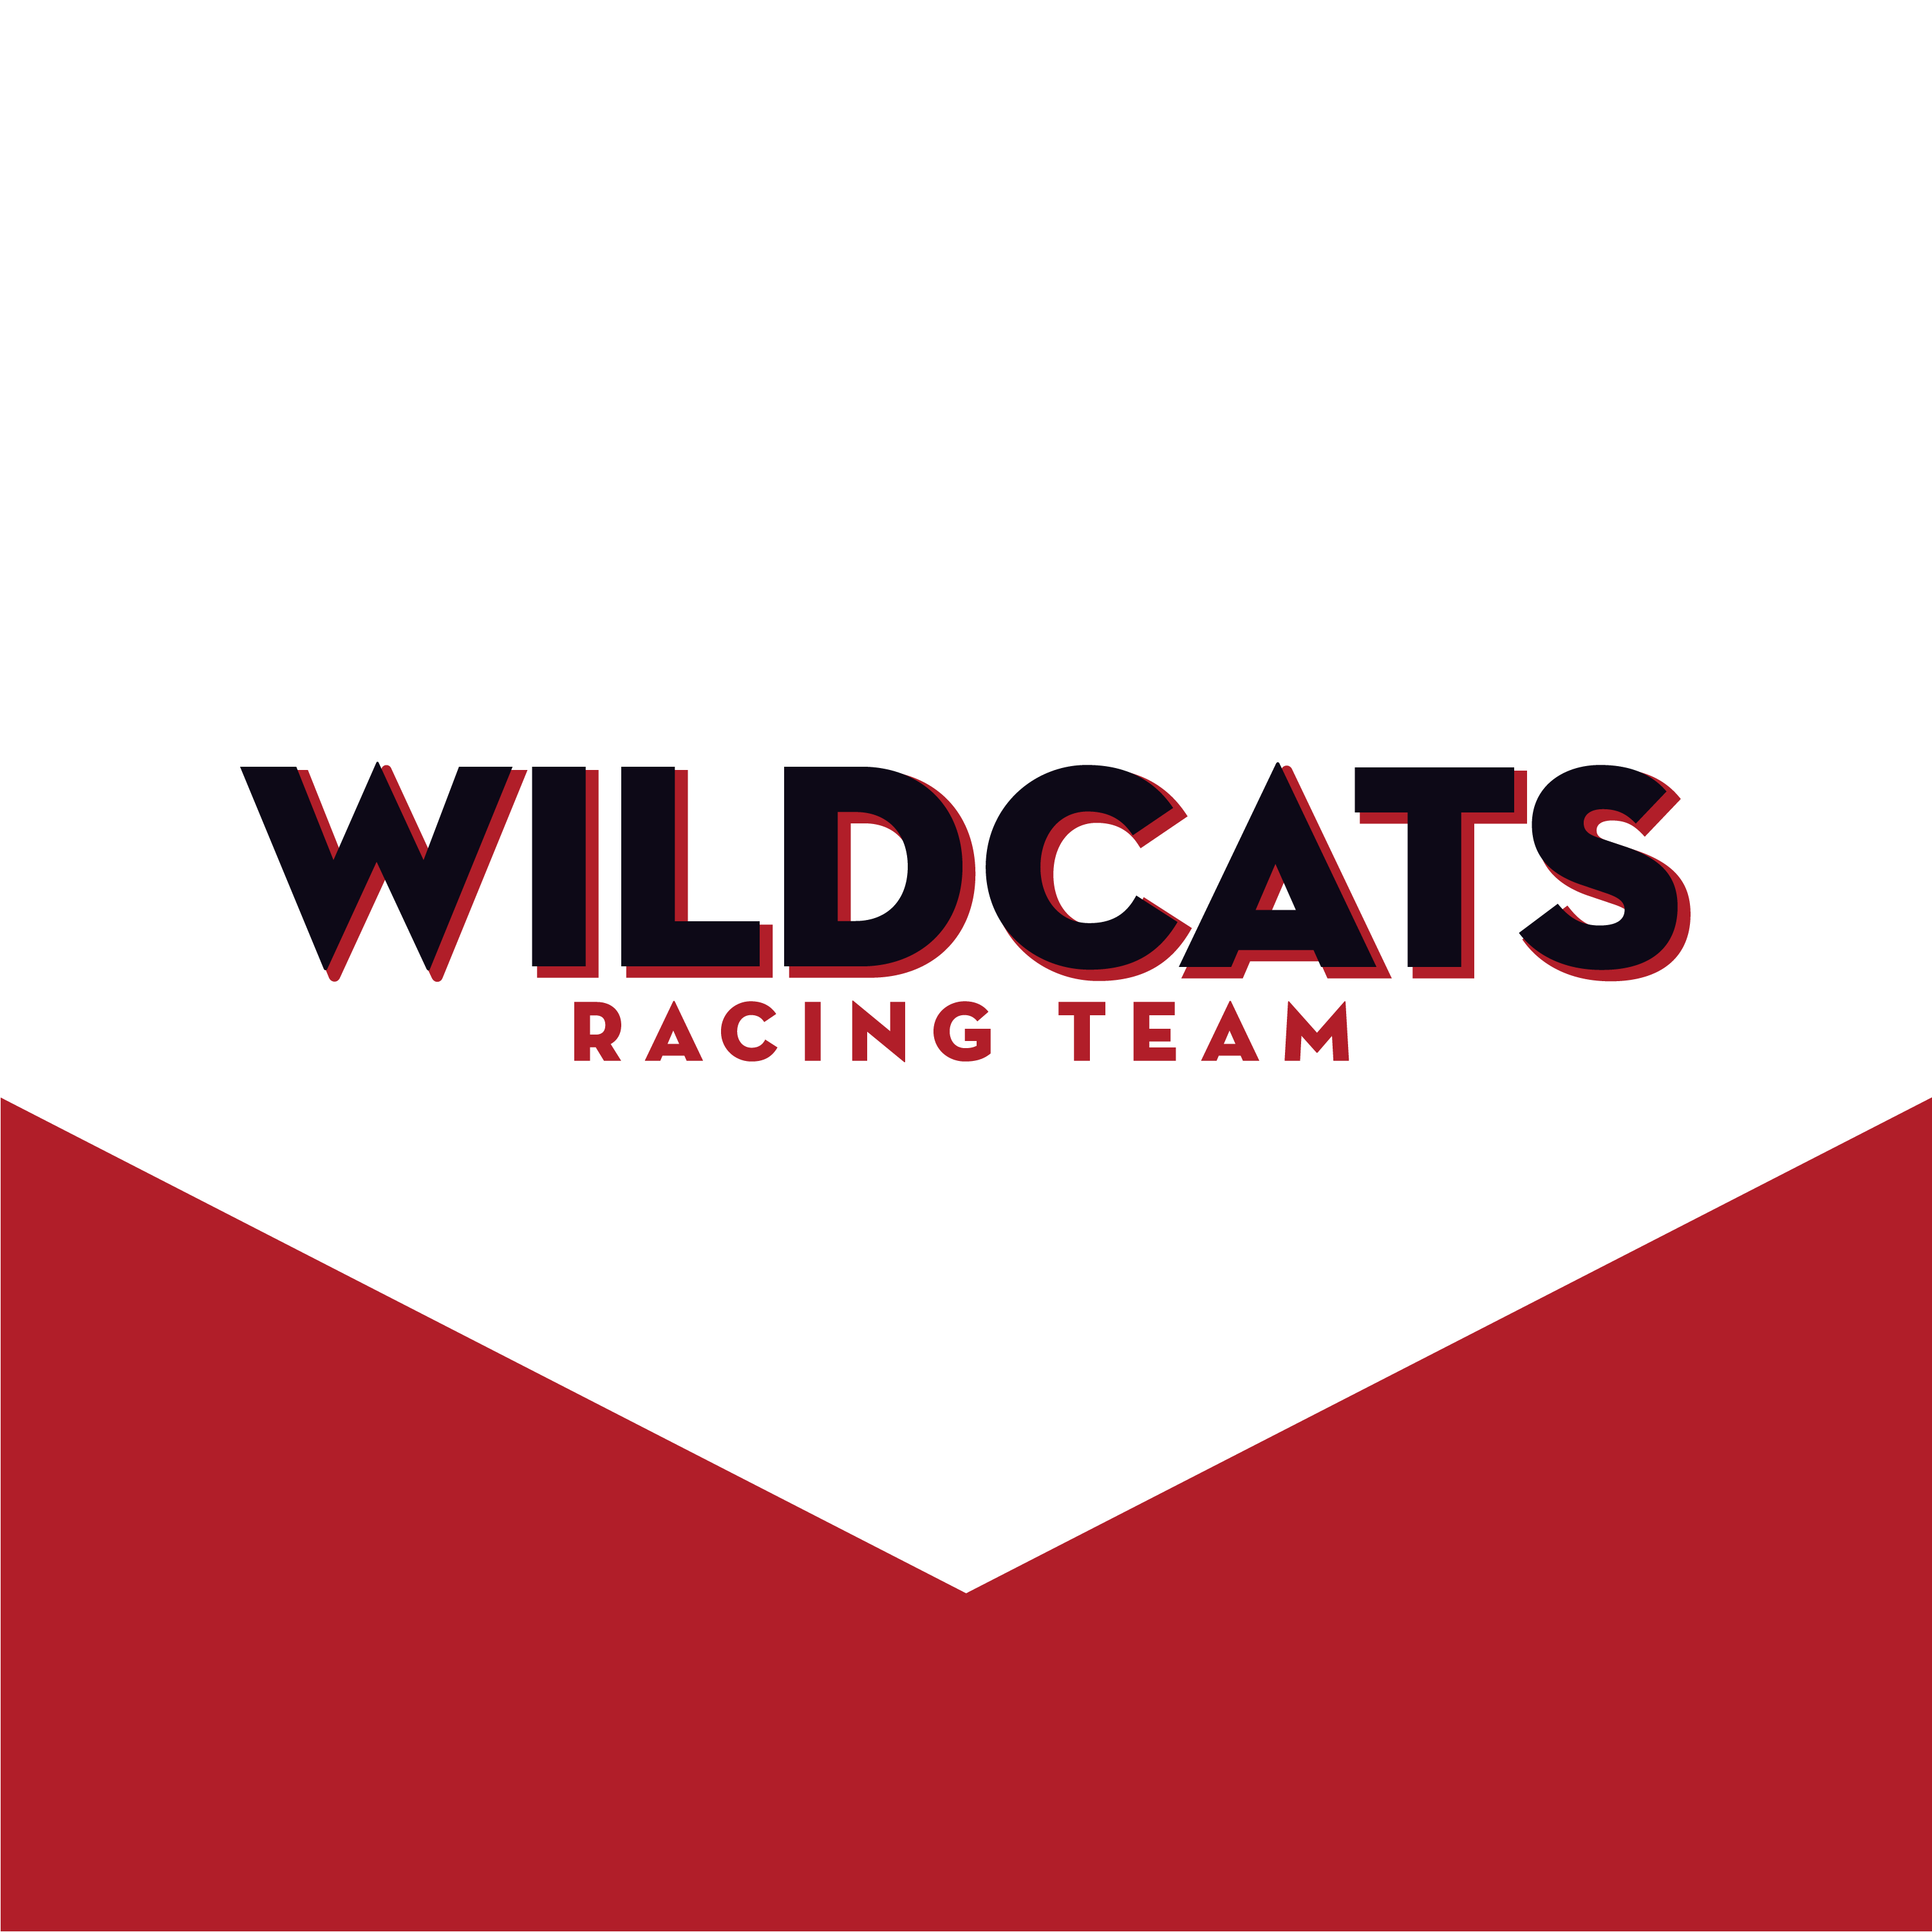 Club Image for WILDCATS RACING TEAM